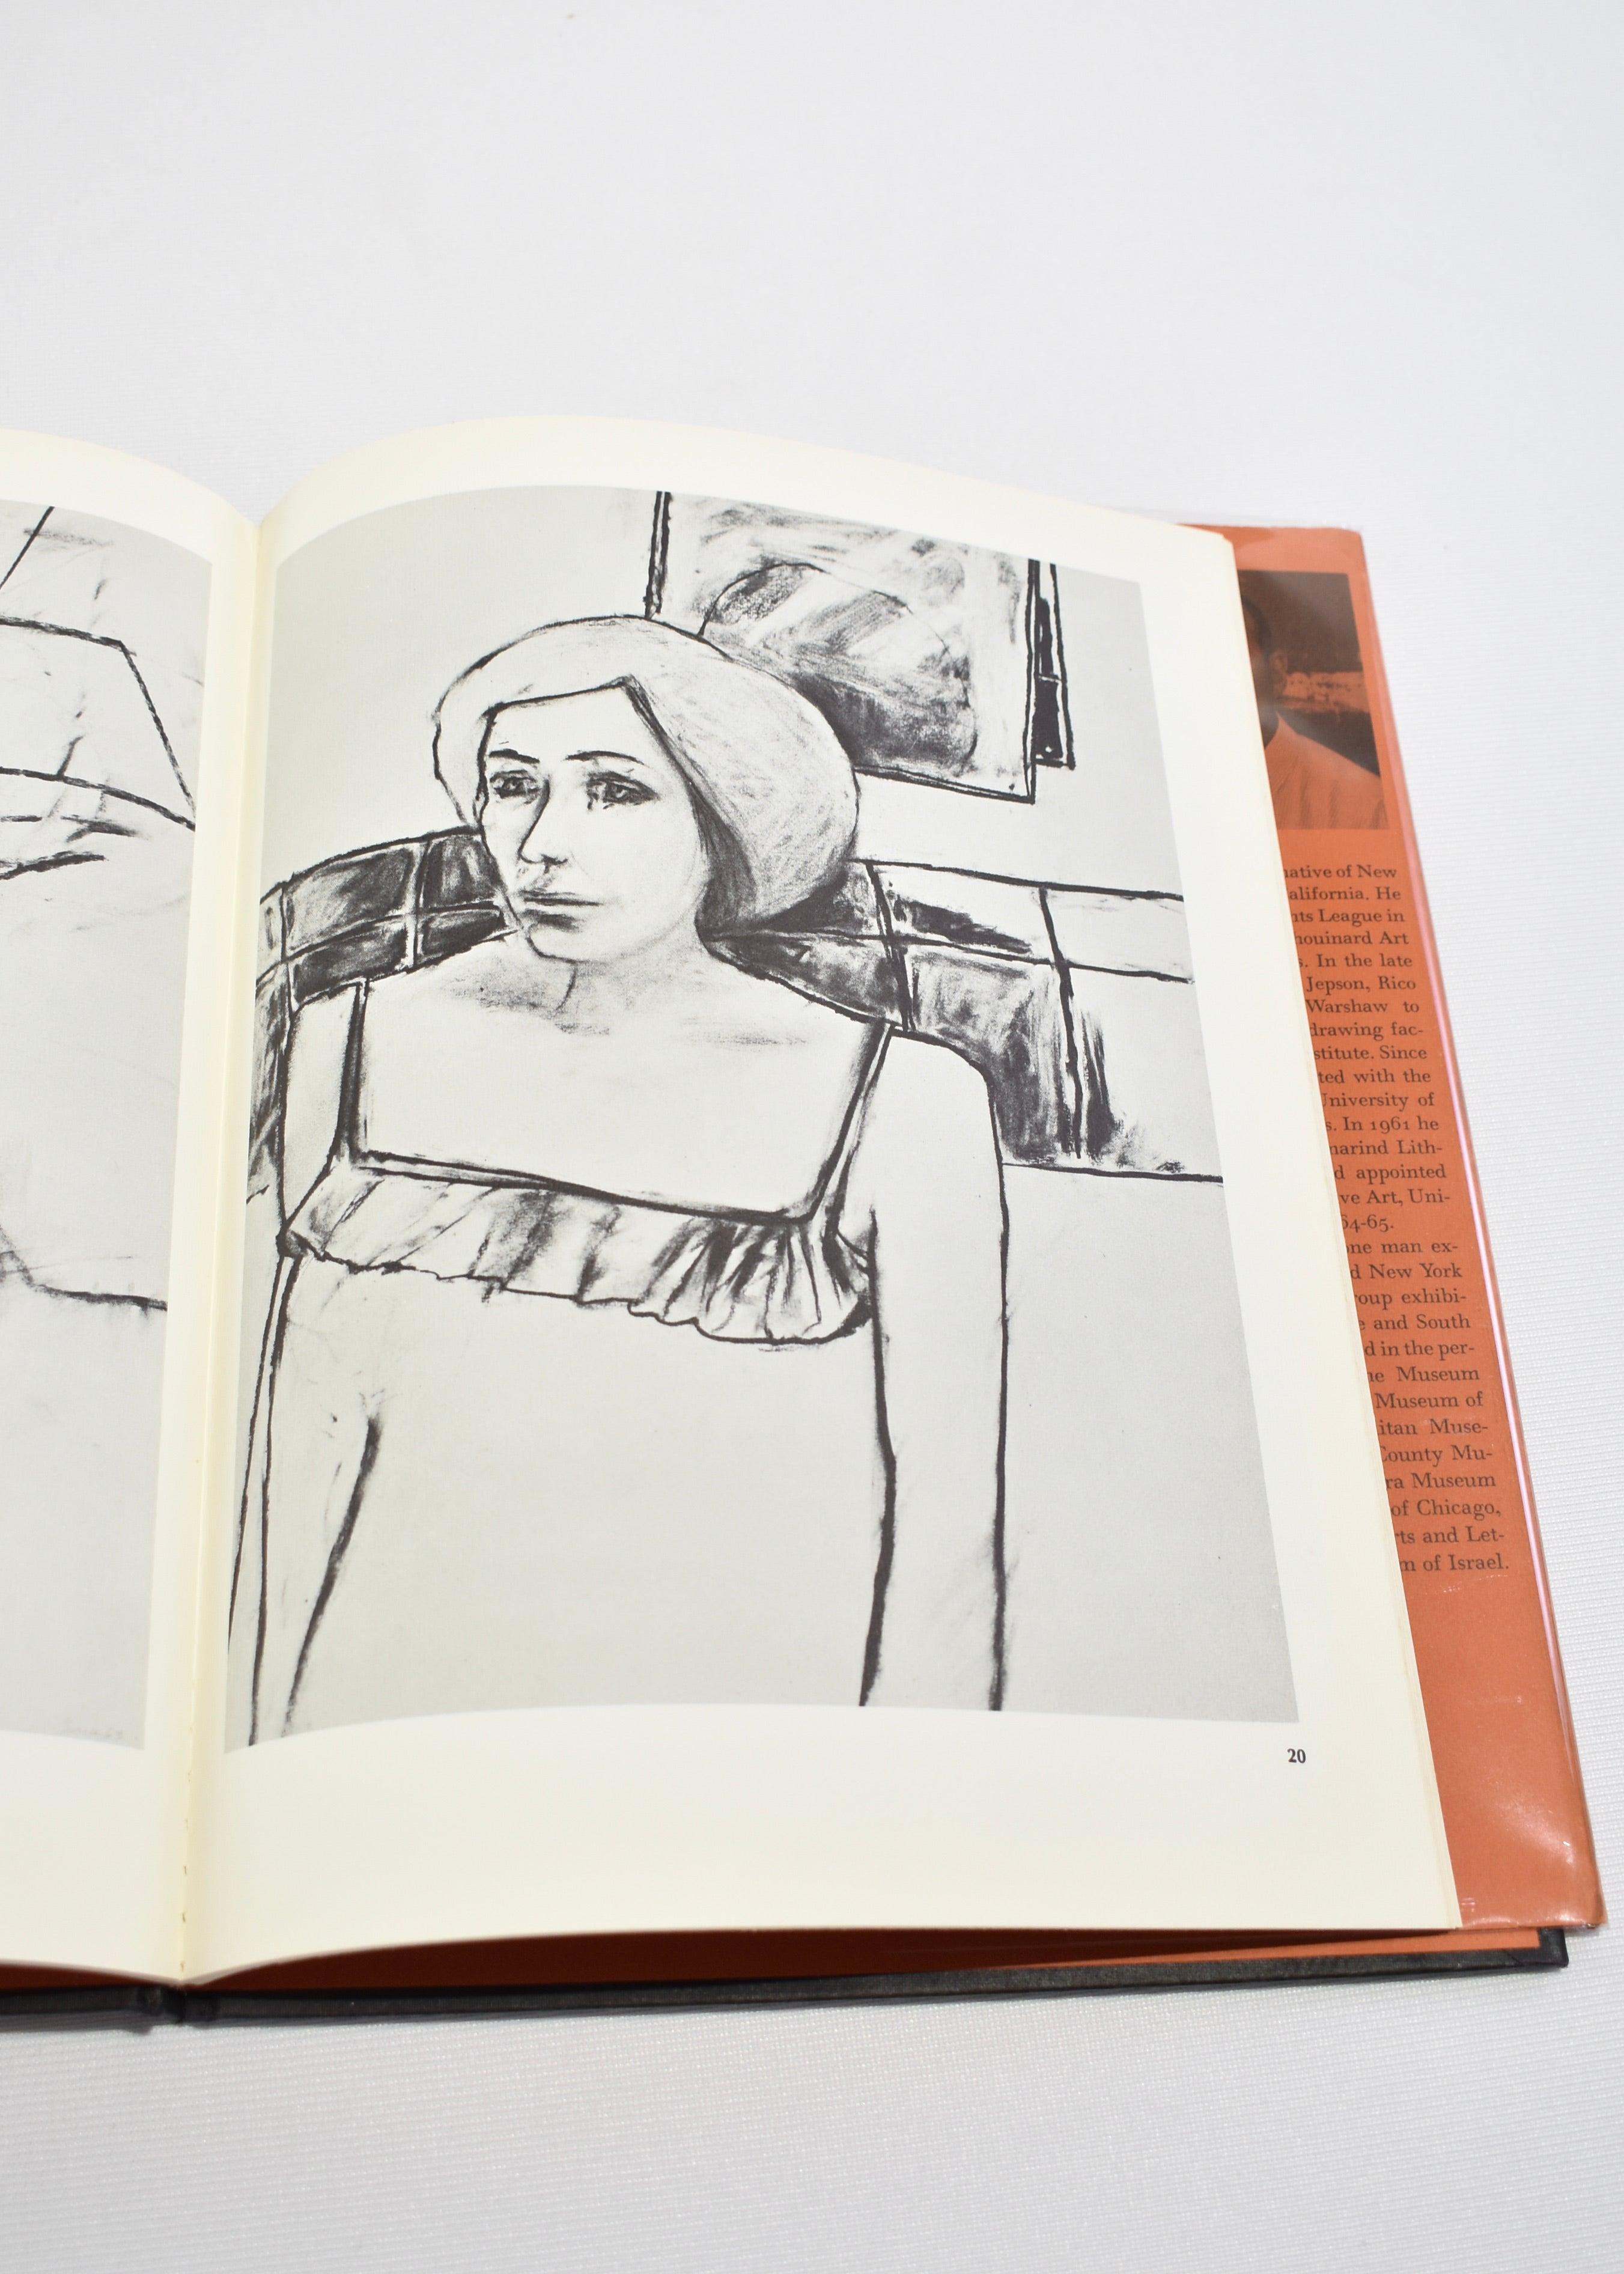 Vintage hardback coffee table book featuring artist, William Brice and a selection of his drawings from 1955-1966. By Gerald Nordland and Thomas W. Leavitt, published in 1967. First edition, 40 pages.

